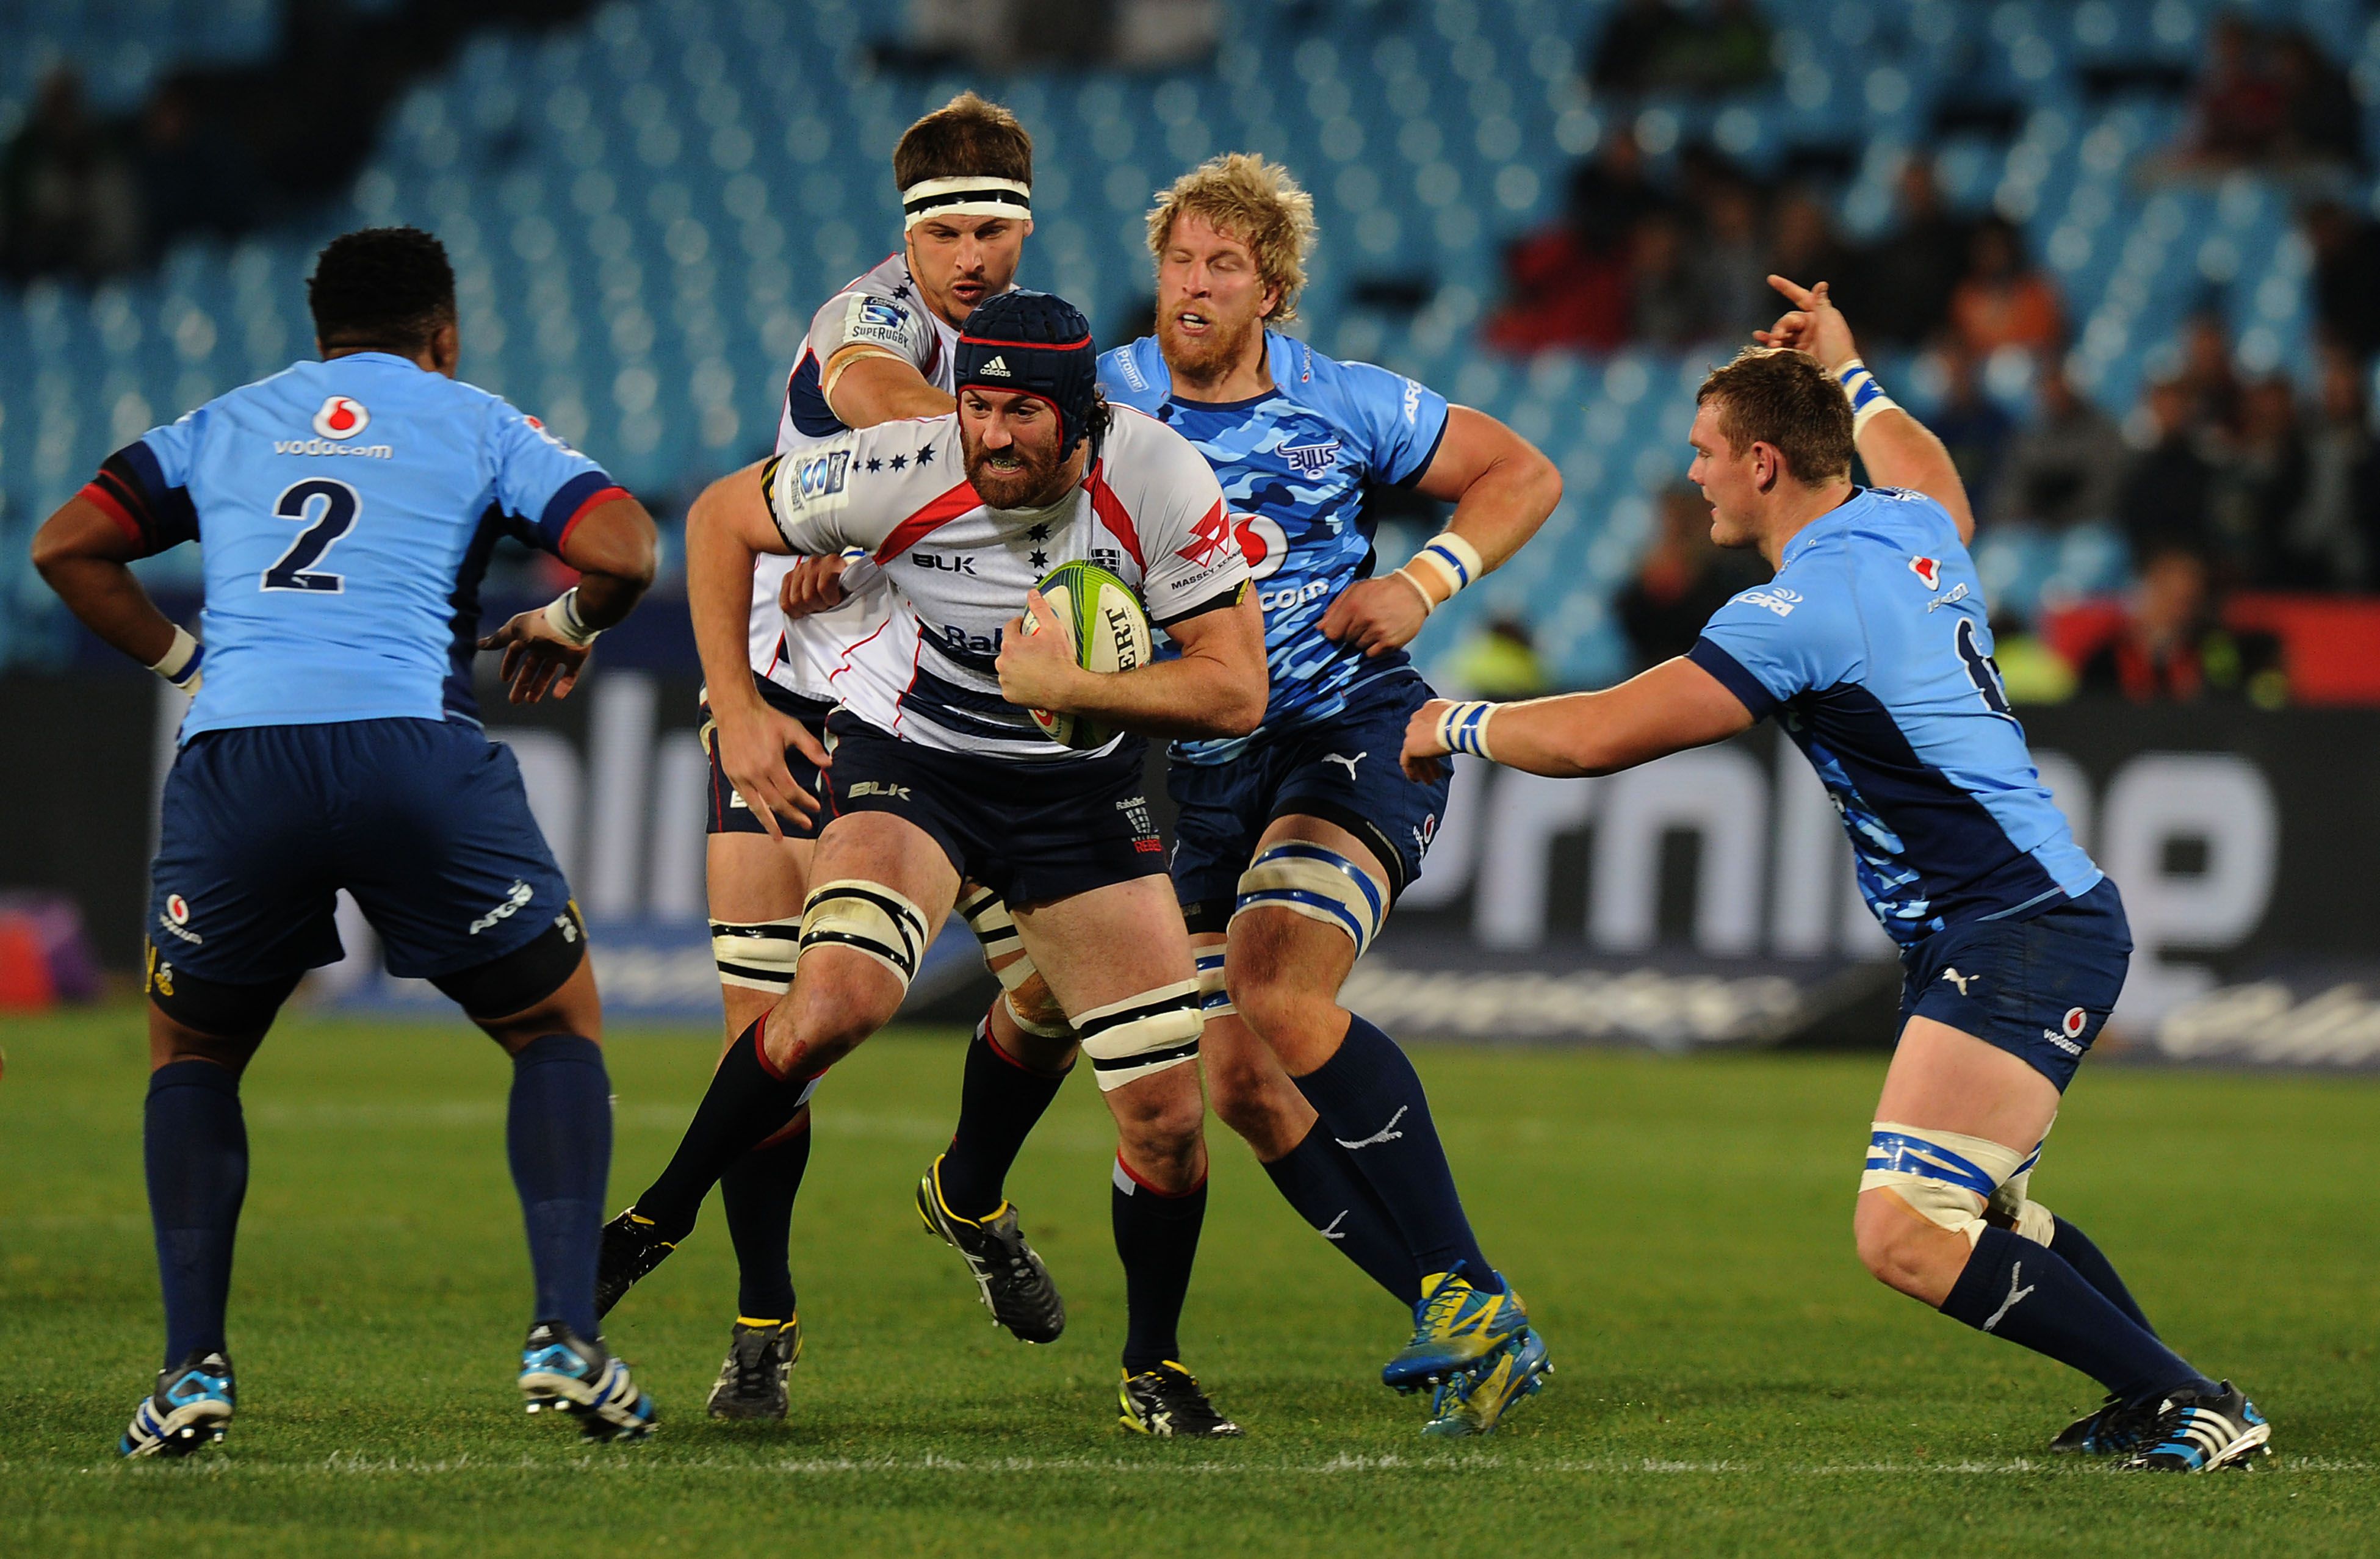 Caderyn Neville of the Melbourne Rebels tries to break through during their Super 15 match against the Bulls in Pretoria. The Bulls won 40-7. Photo: AFP